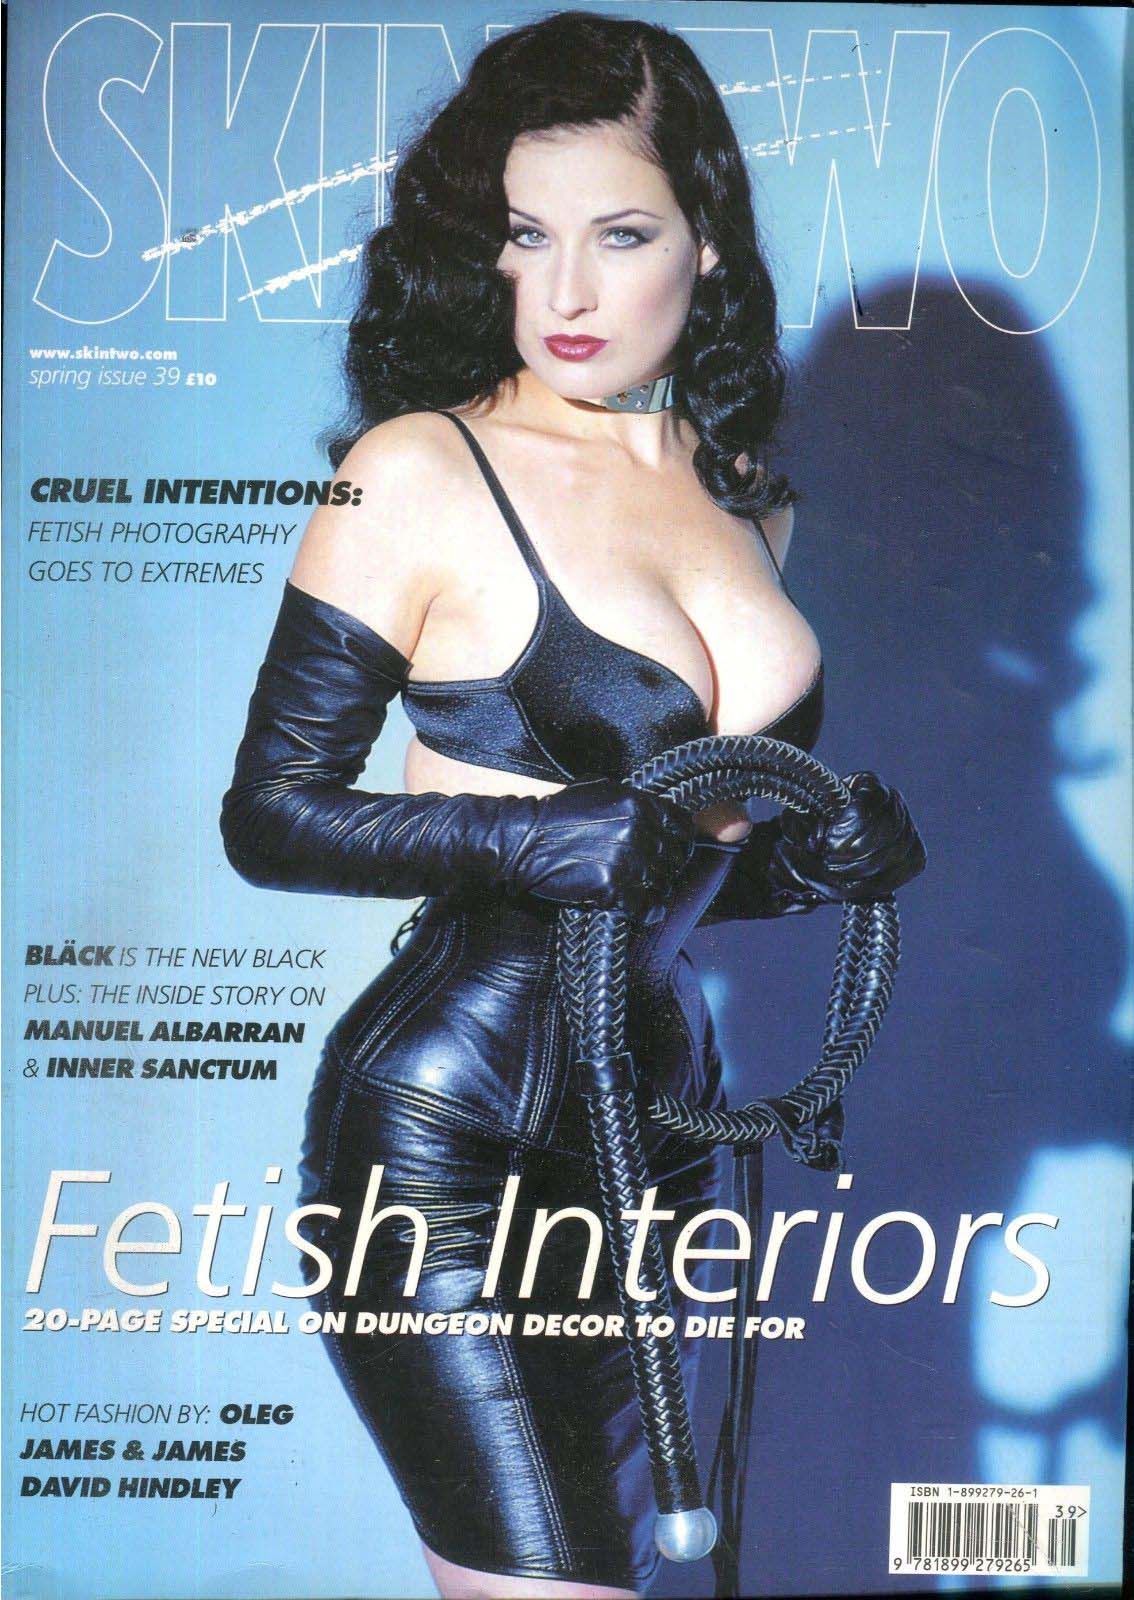 Skin Two # 39 magazine back issue Skin Two magizine back copy Skin Two # 39 Adult Fetish Magazine Back Issue Published in the UK by KFS MEdia. Cruel Intentions: Fetish Photography Goes To Extremes.